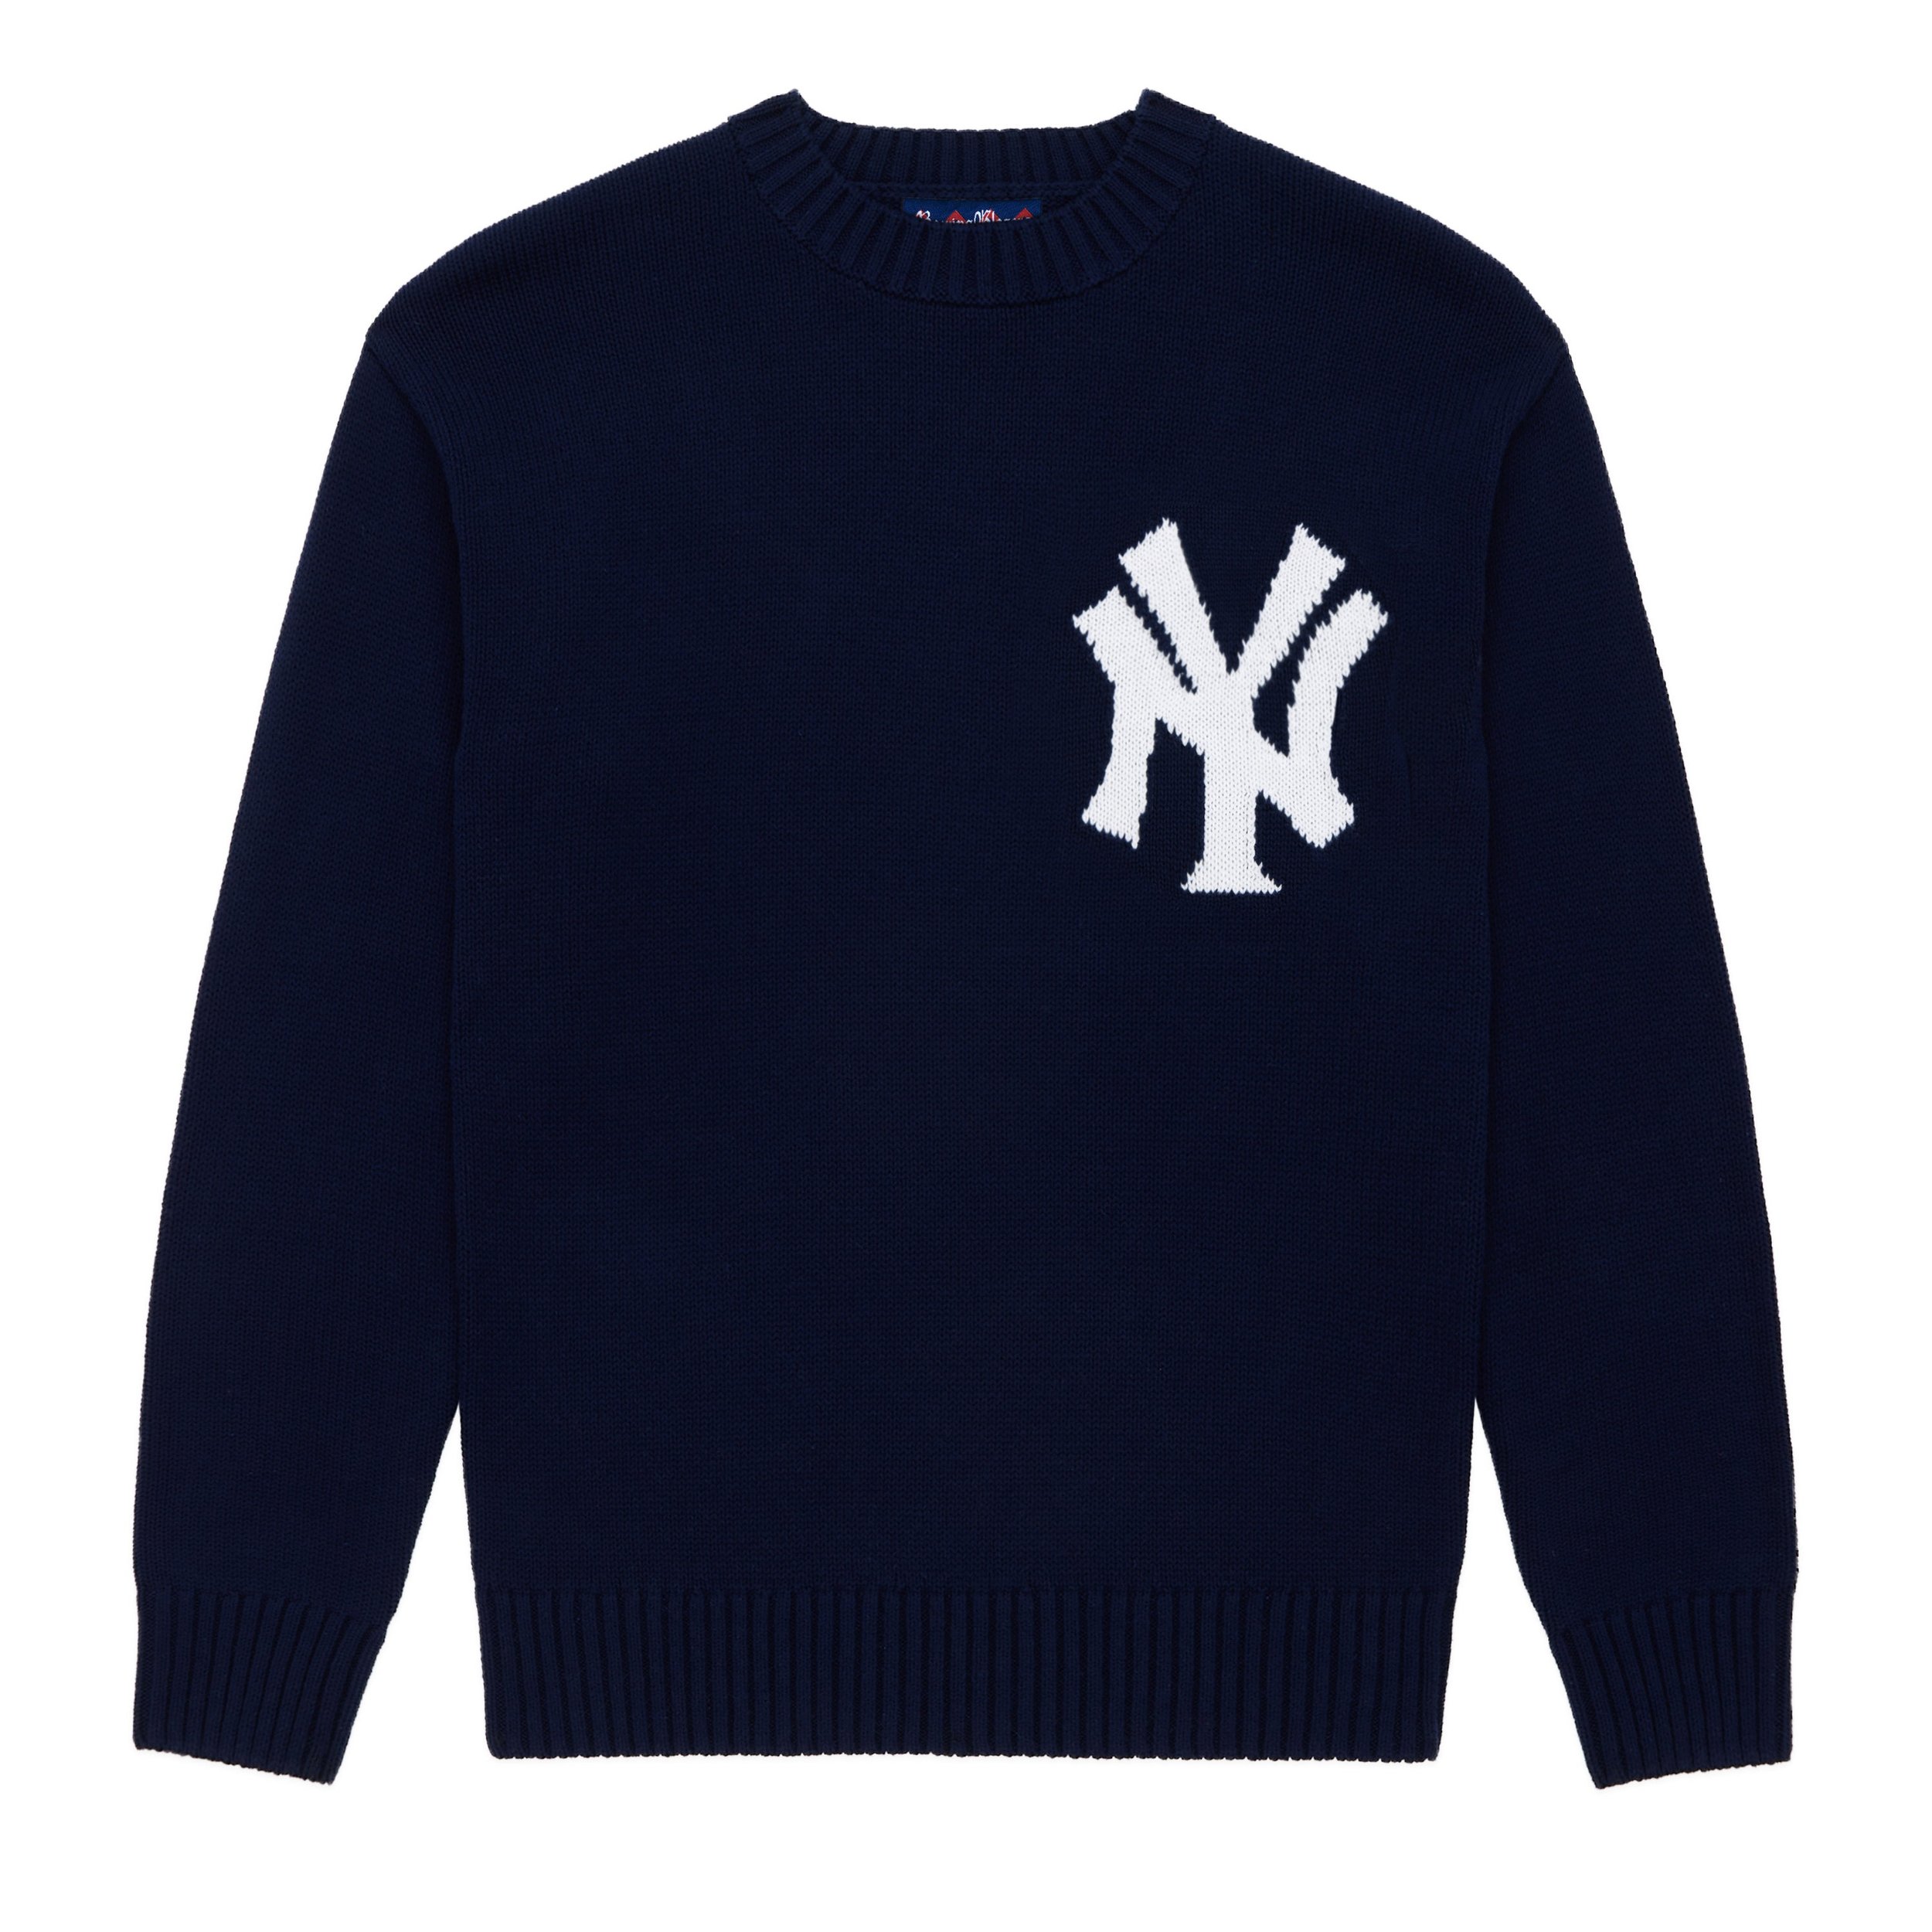 Rowing Blazers x '47 Solid Yankees sweater - £215